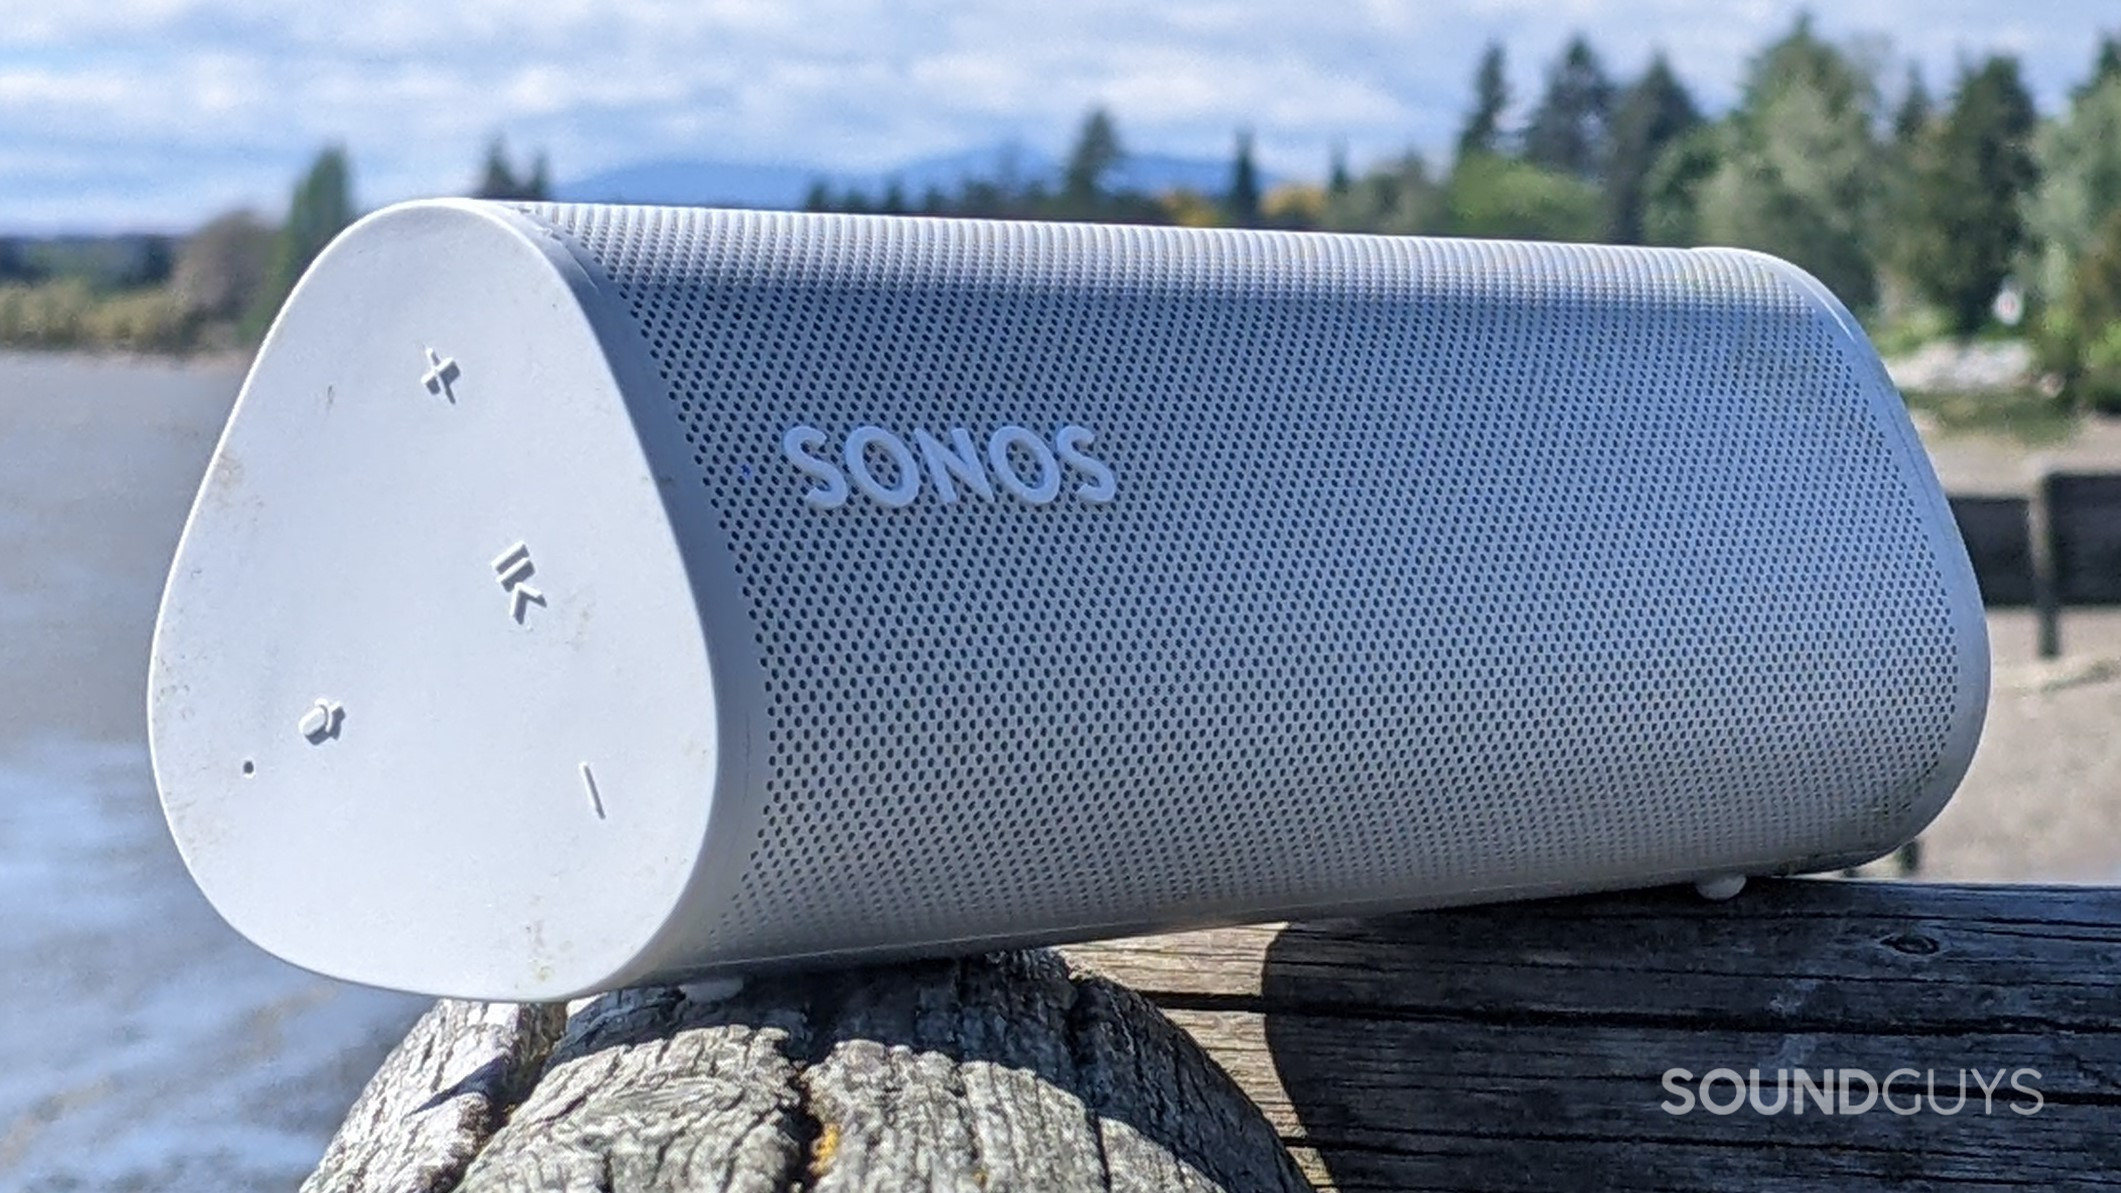 A white Sonos Roam speaker sitting diagonally across the corner of a wooden railing in front of a body of water and some trees surrounding a beach in the distant background.